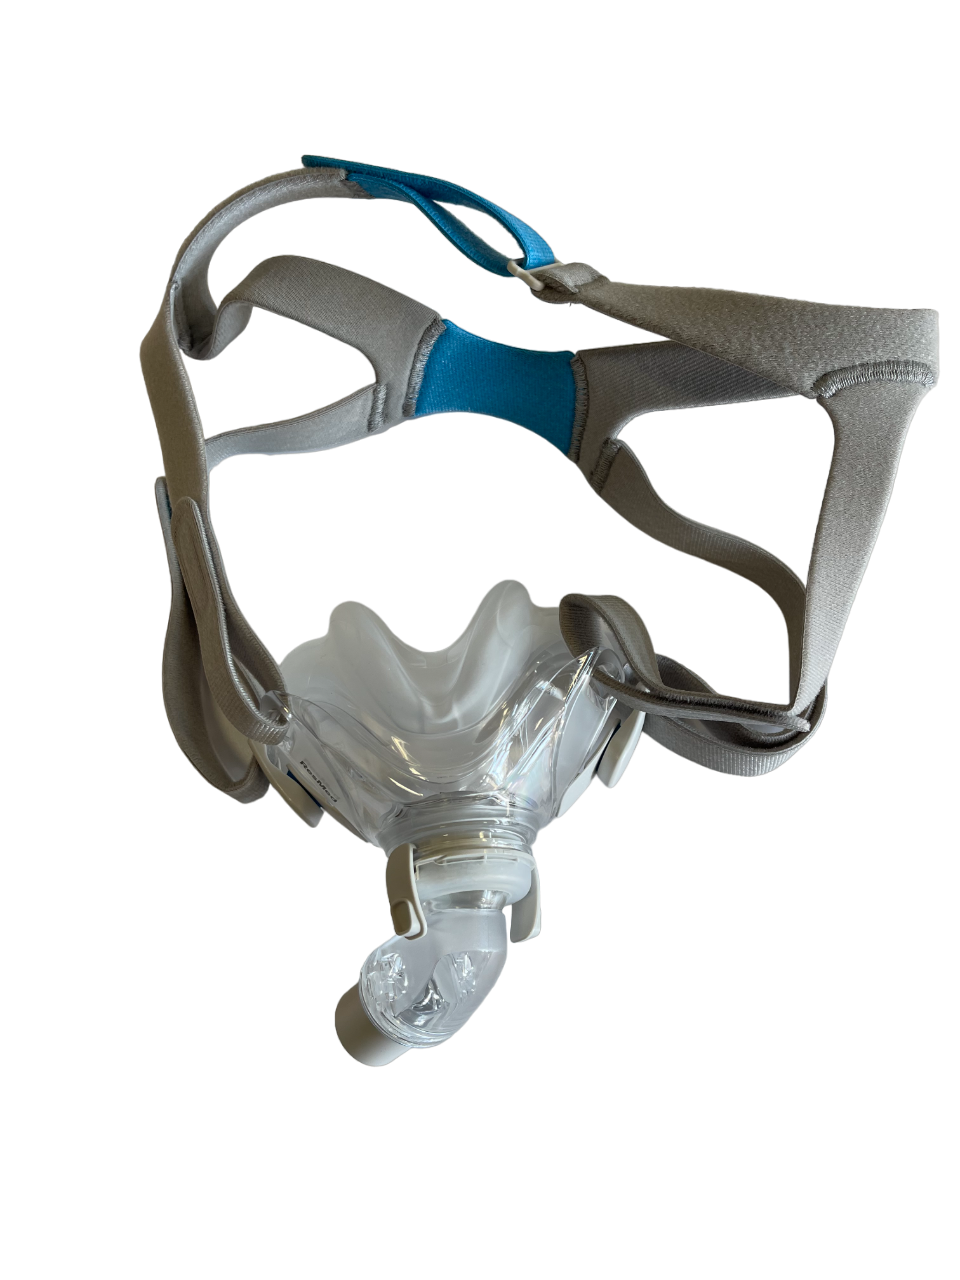 ResMed AirFit F30 Full Face CPAP Interface with Headgear